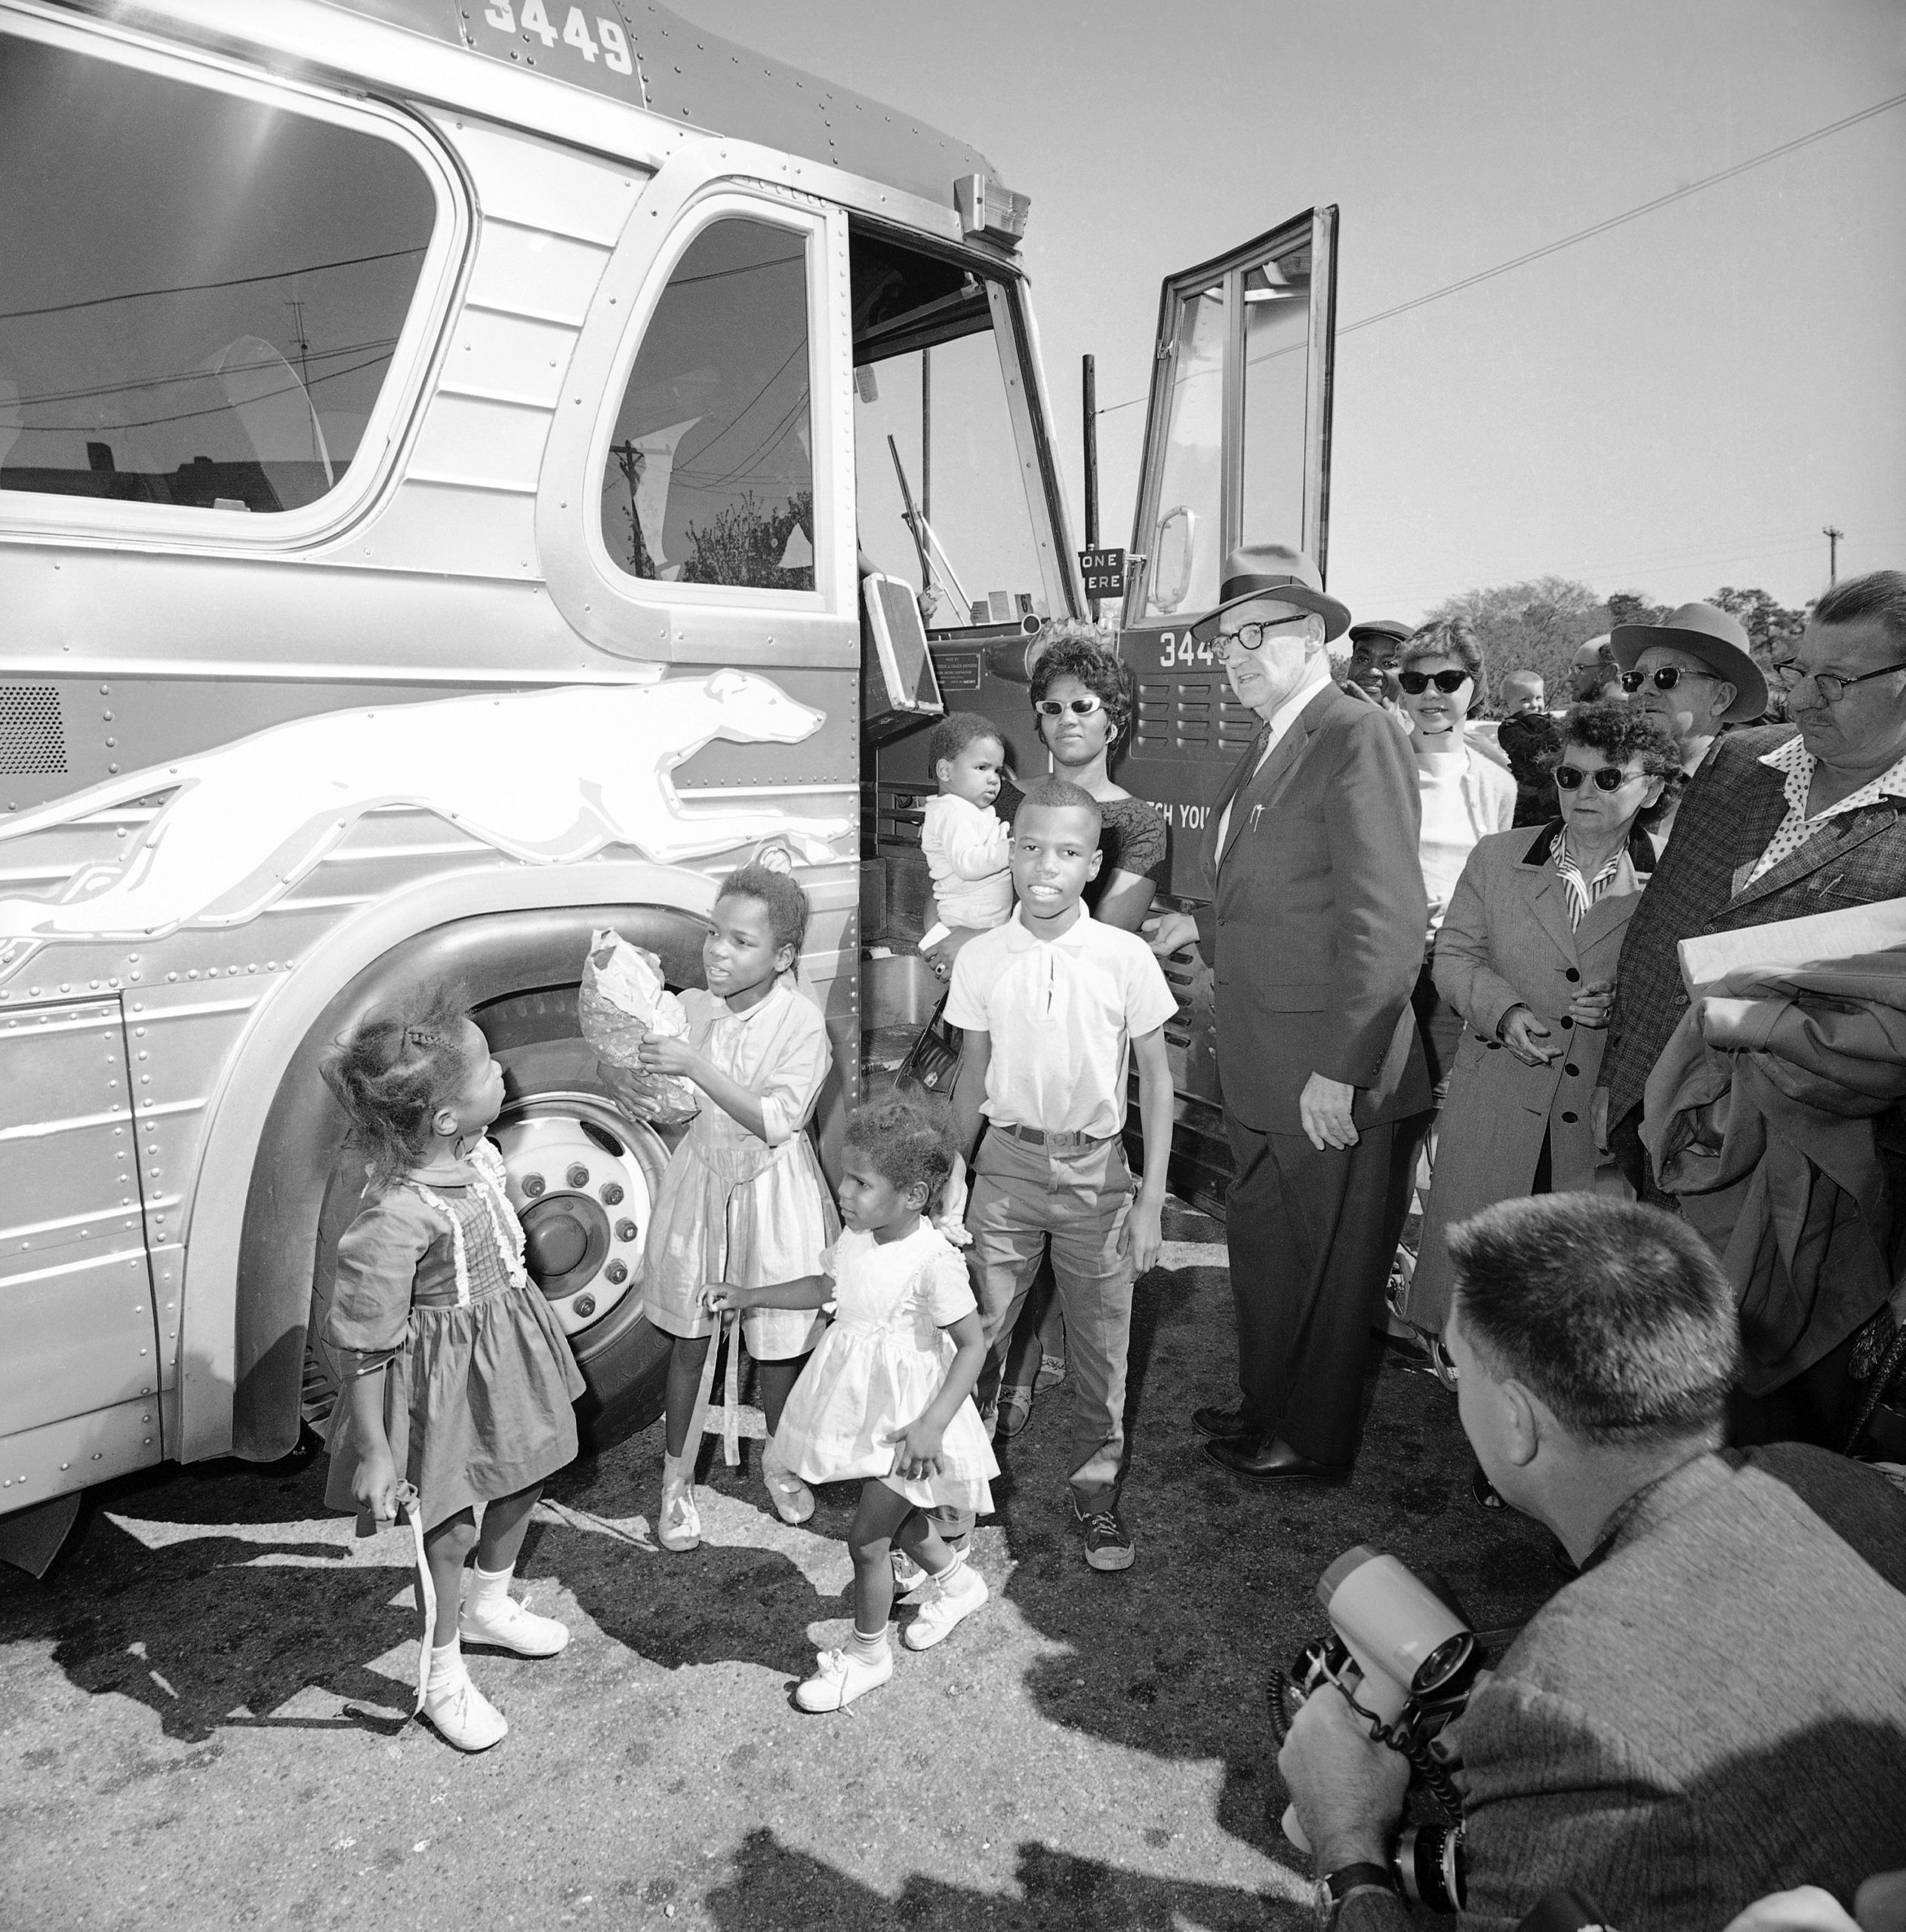 In this historical black and white photo, a group of Black people disembark from a bus, wearing 1960s era clothing.